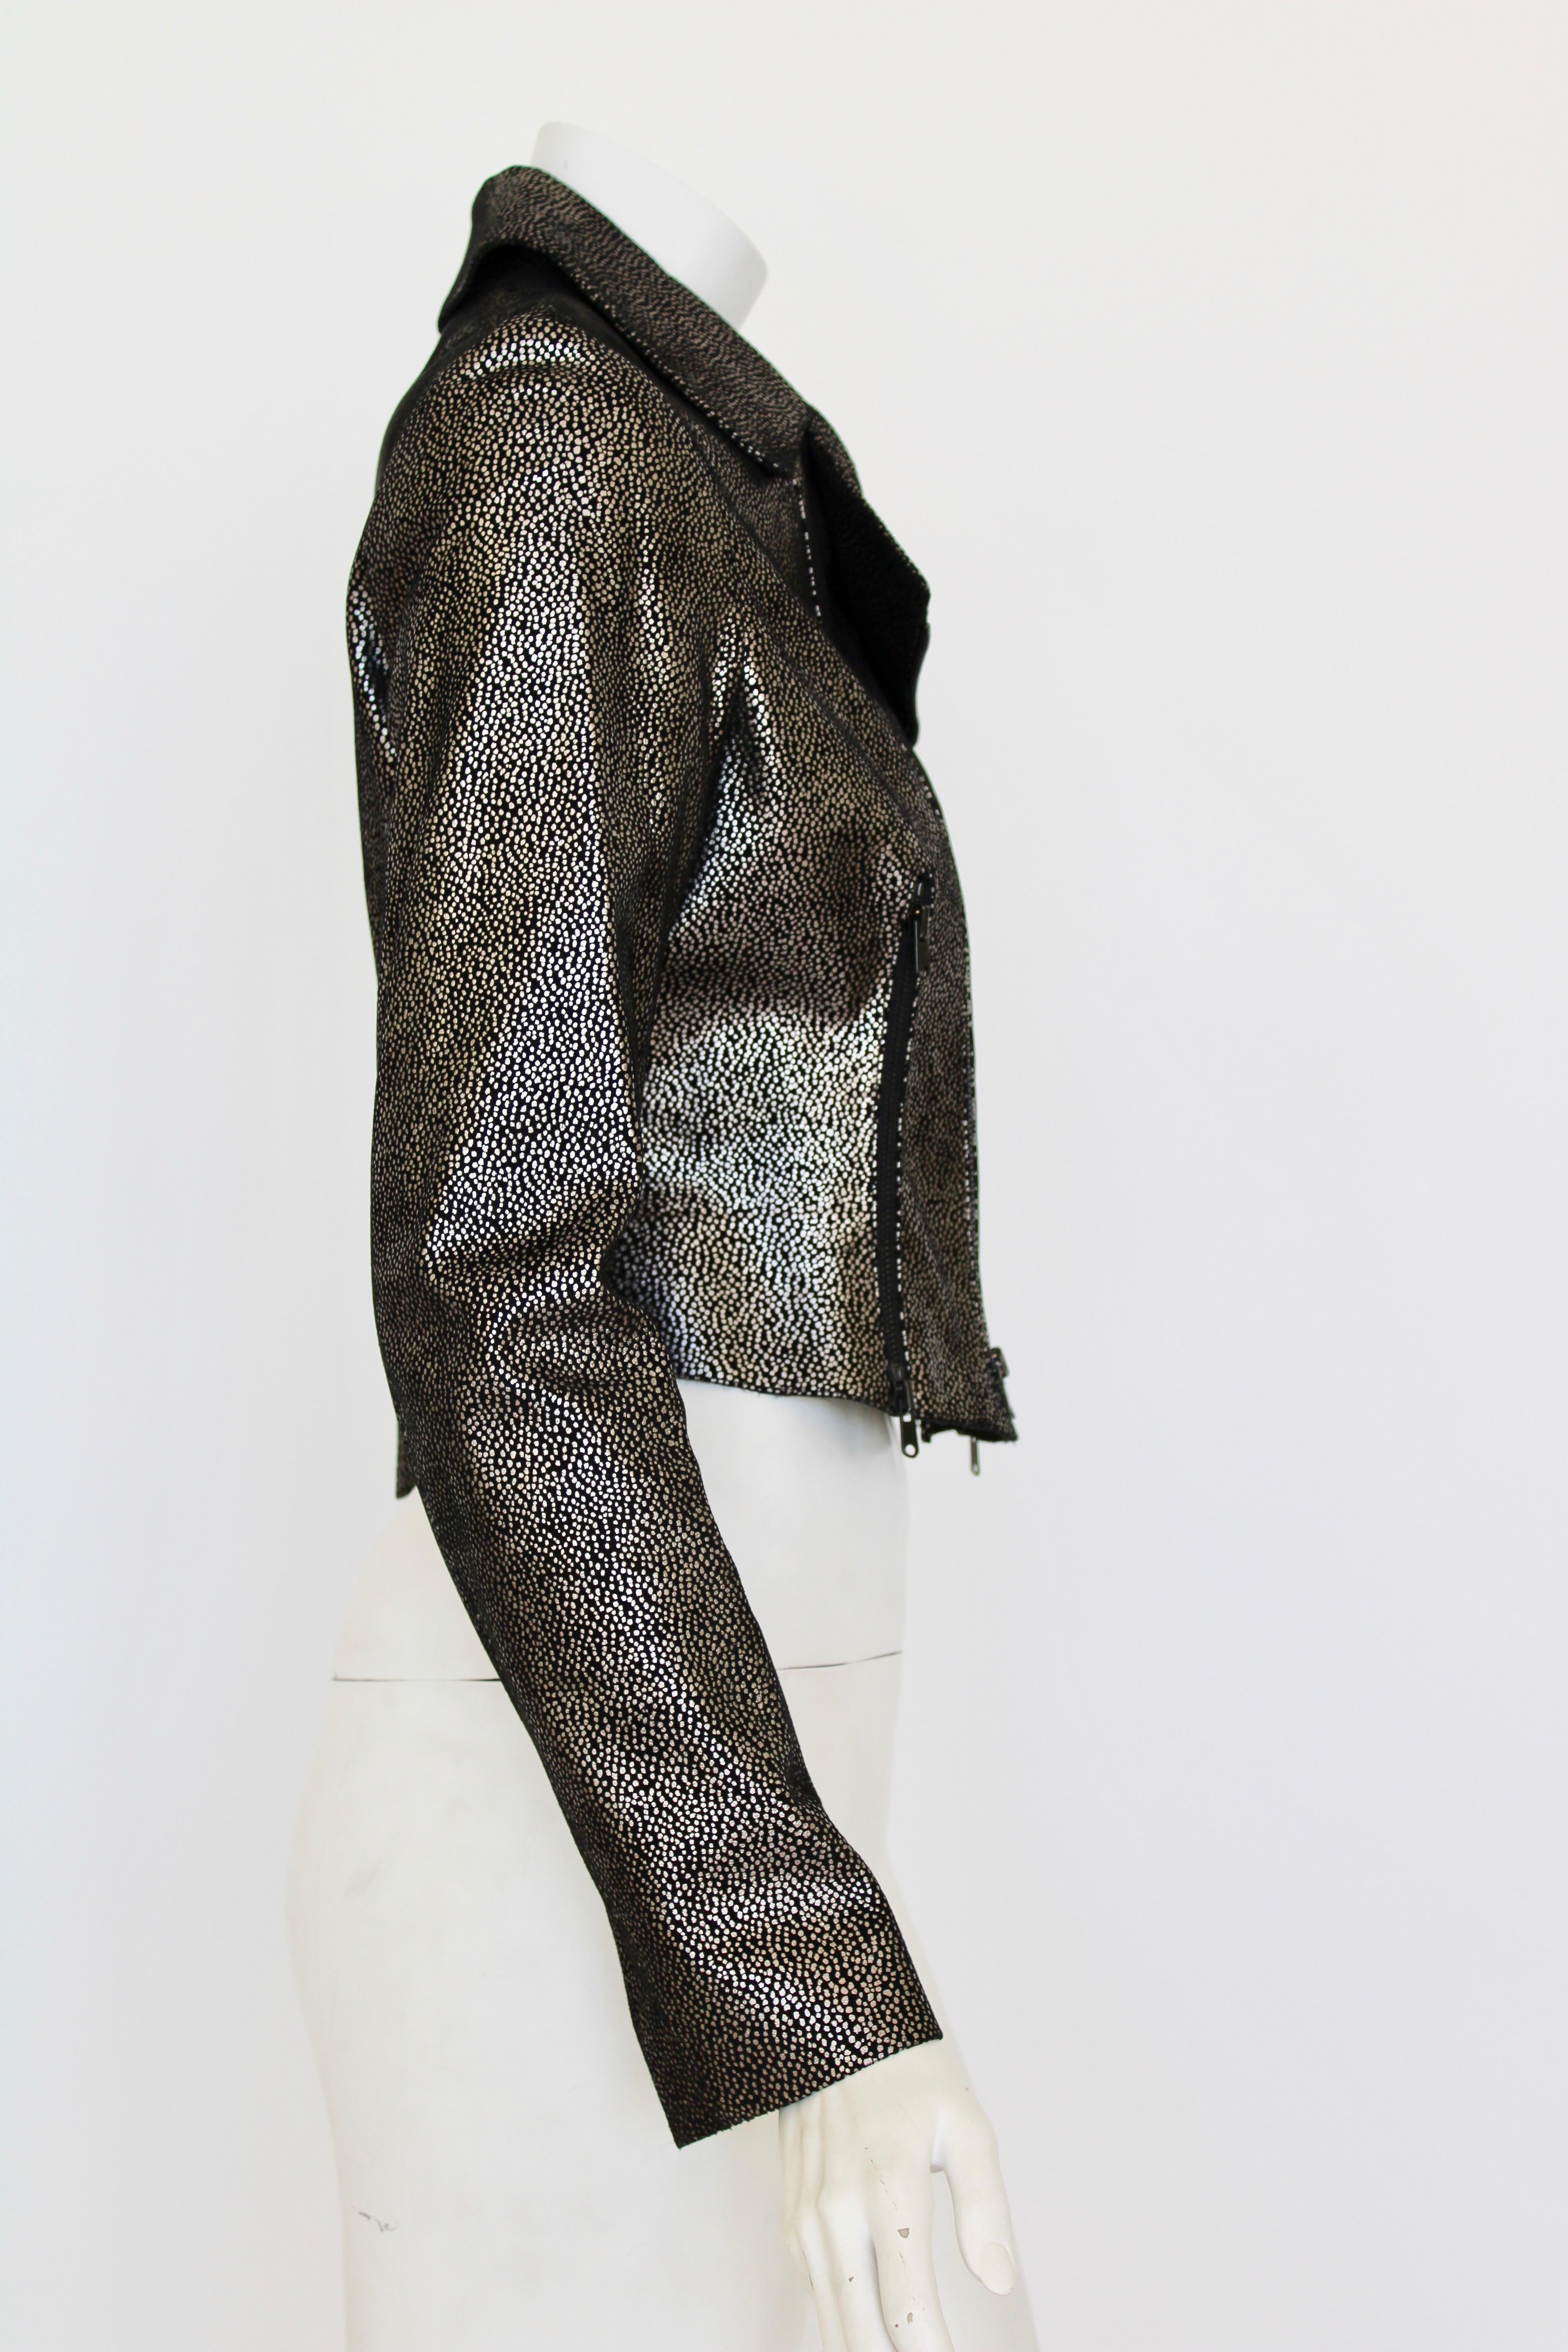 Alaia Metallic Suede Moto jacket In New Condition For Sale In New York, NY